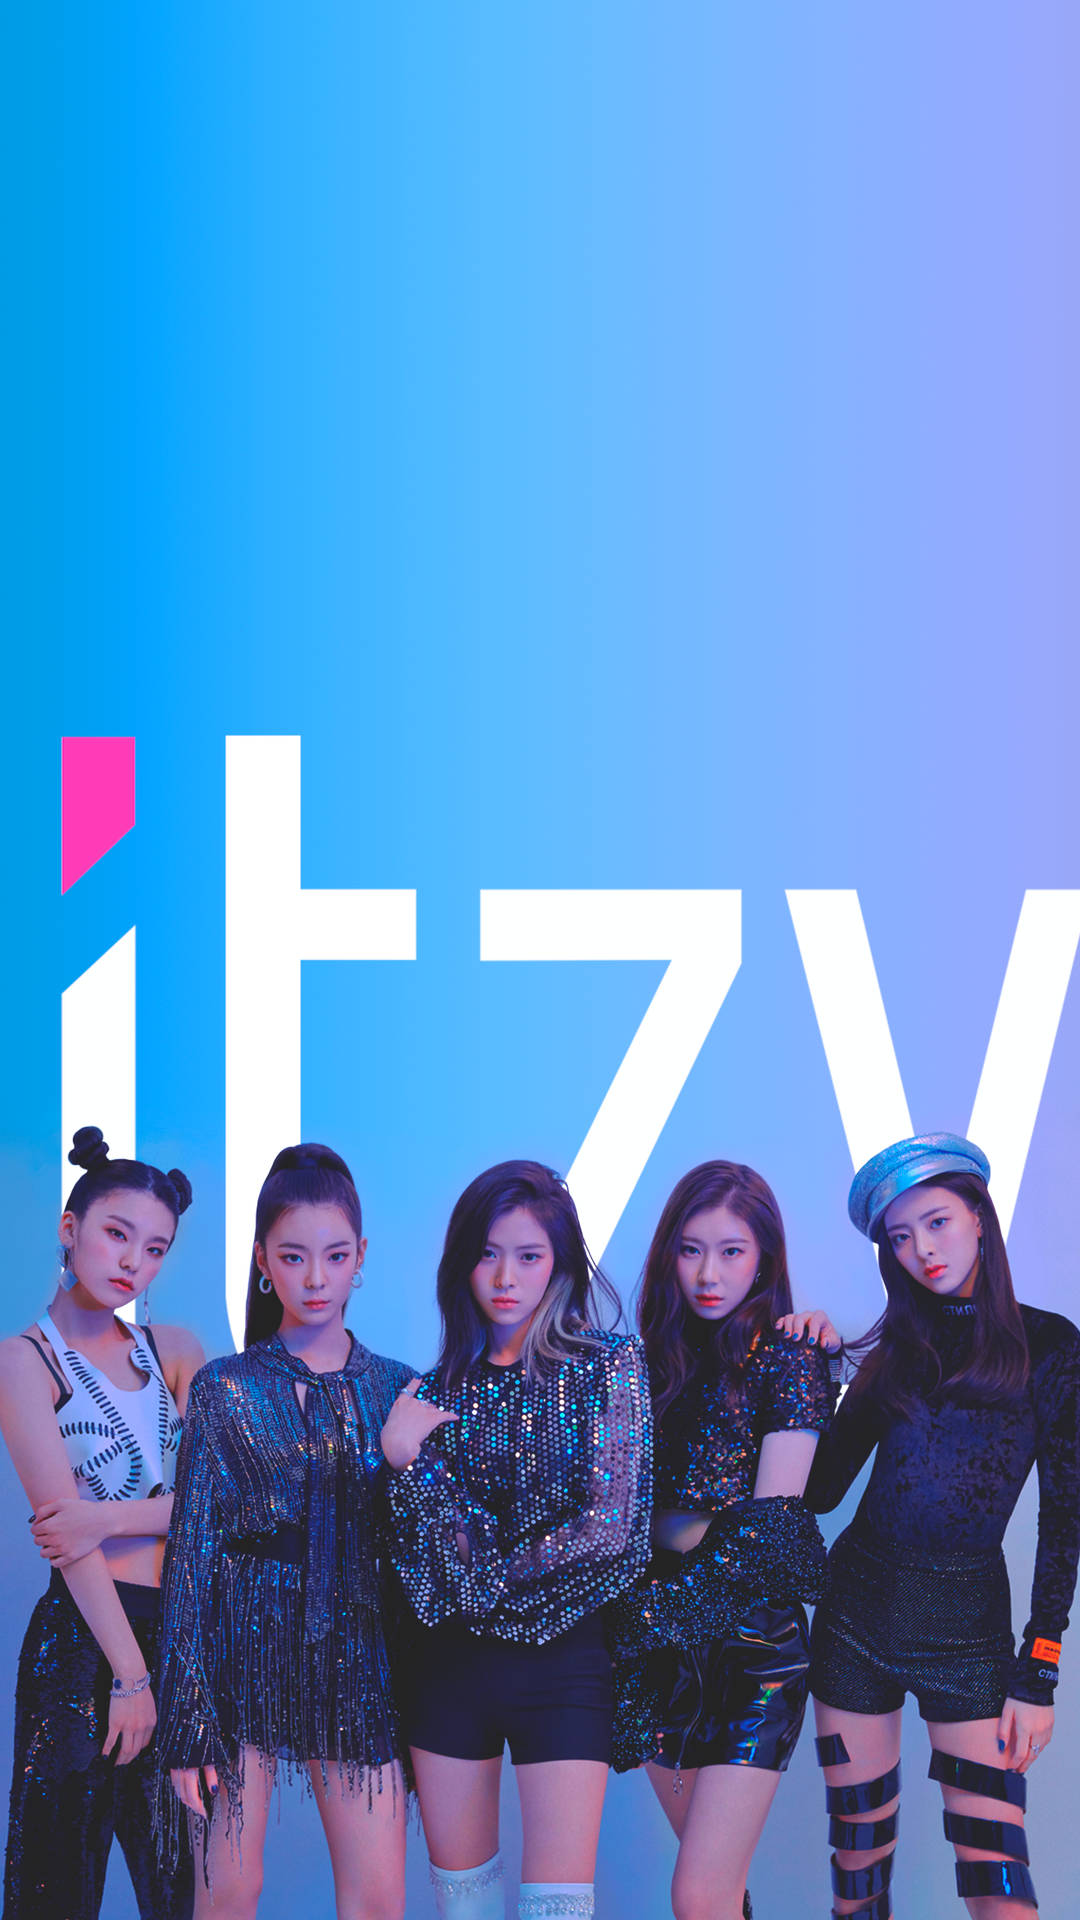 Top 999+ Itzy Wallpaper Full HD, 4K✅Free to Use